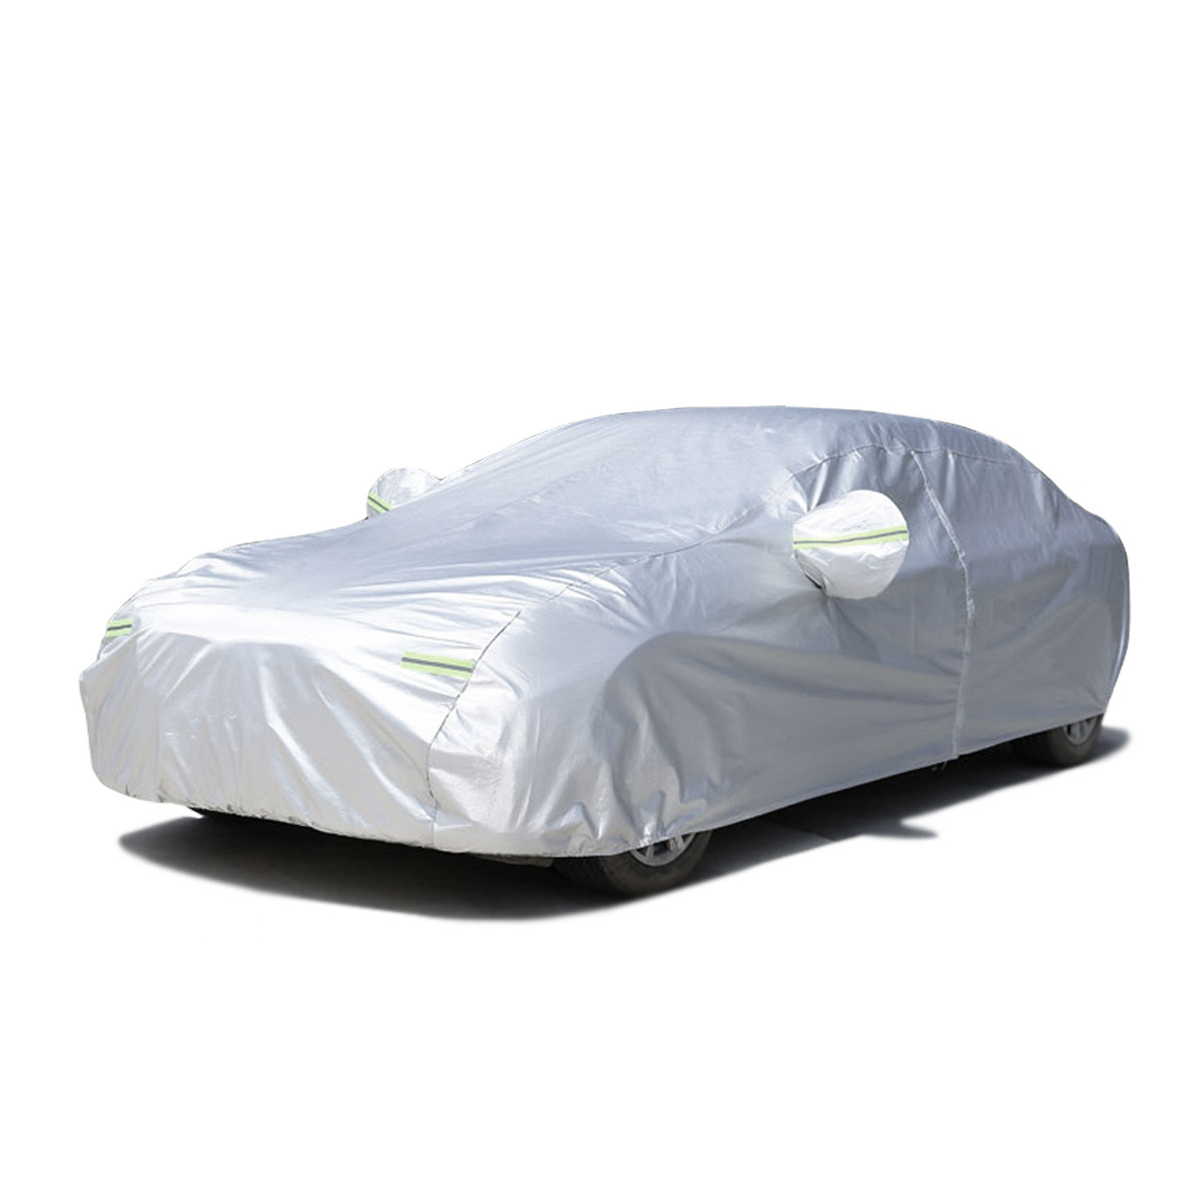 Universal M Full Car Cover Cotton Waterproof Breathable Rain Snow Protection